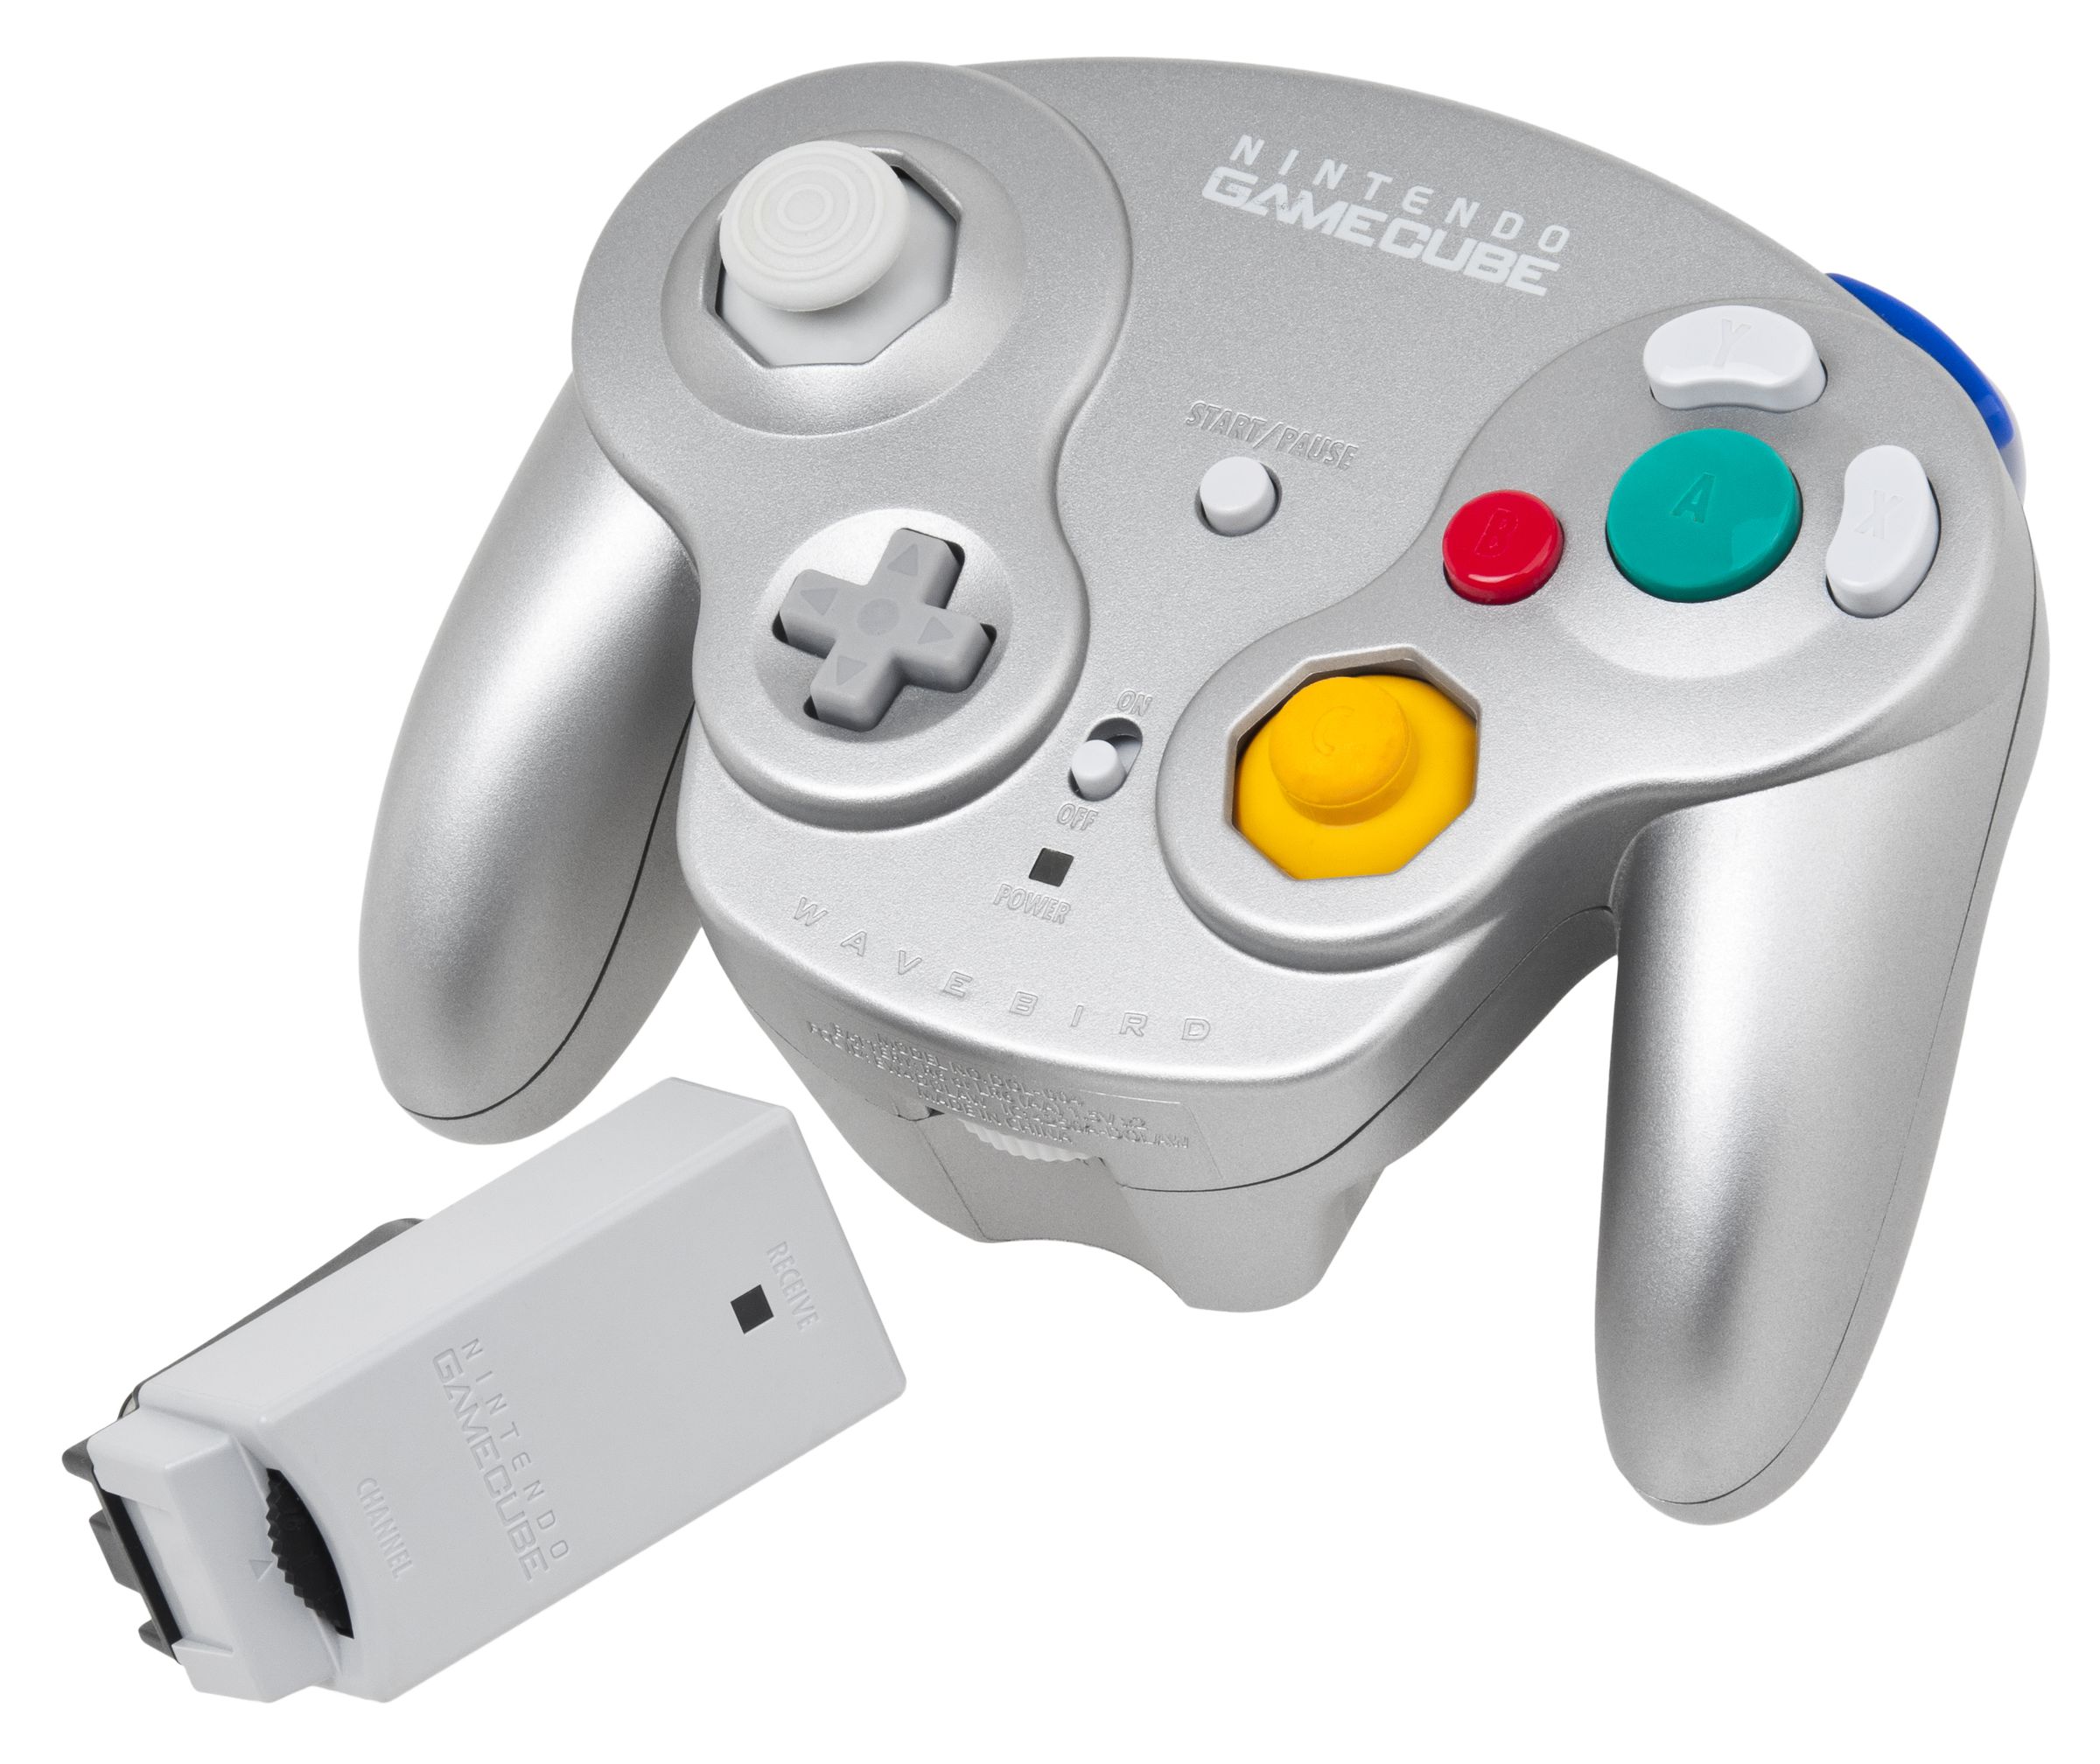 An image of the WaveBird Wireless controller in Silver for the Nintendo GameCube